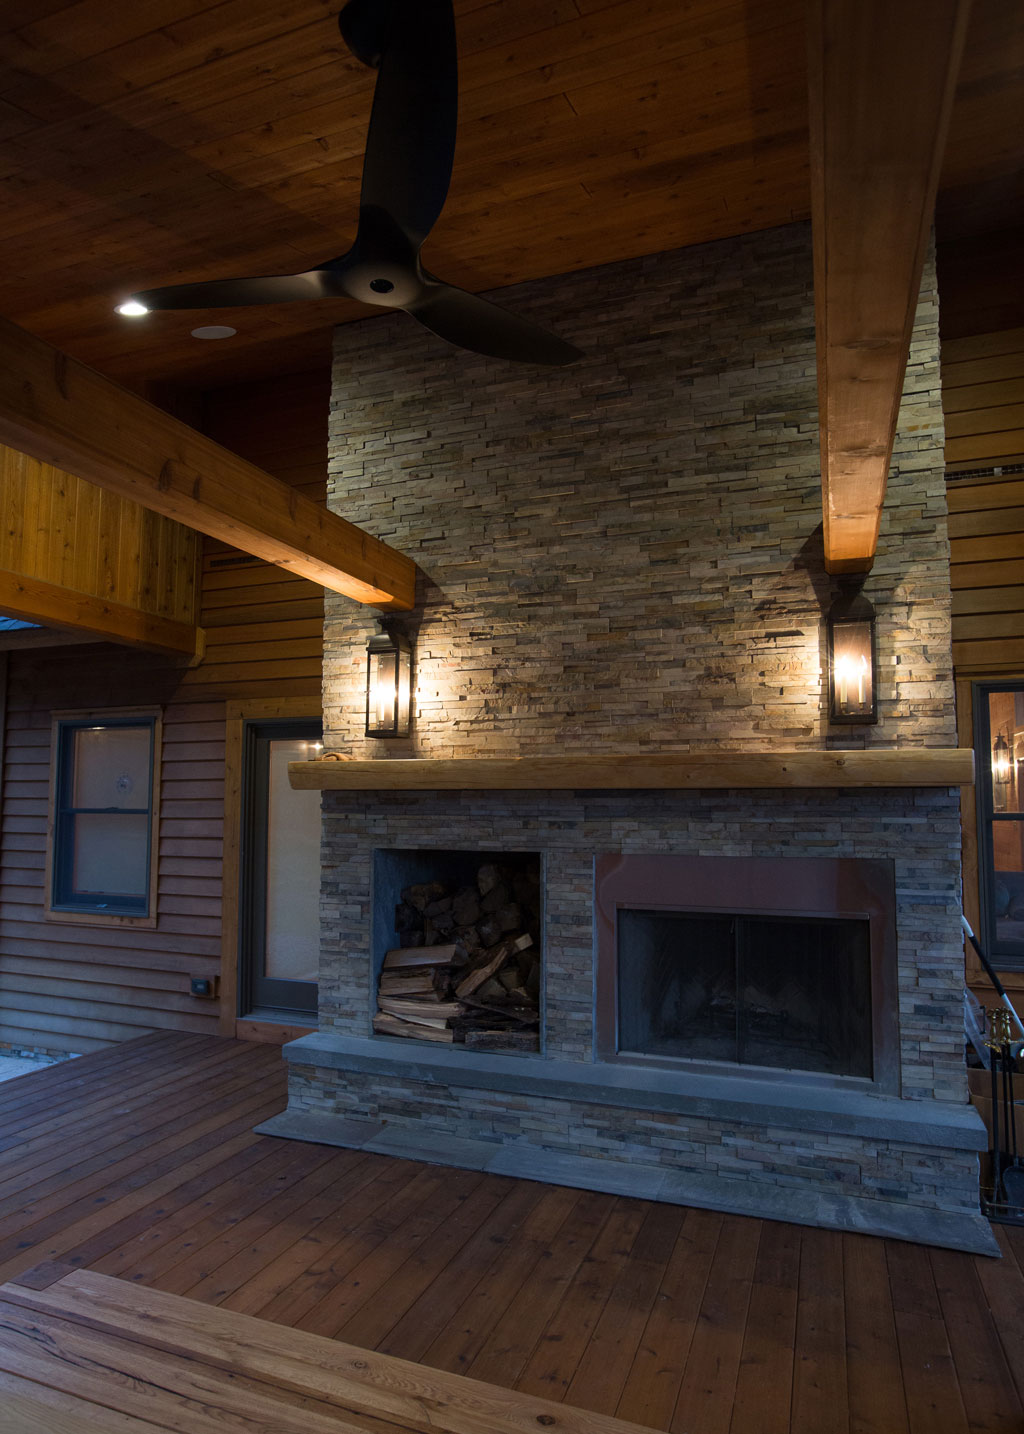 Beaver Mountain Log Homes Country Cubco Cedar Timber Home Outdoor Living Space Stone Fireplace